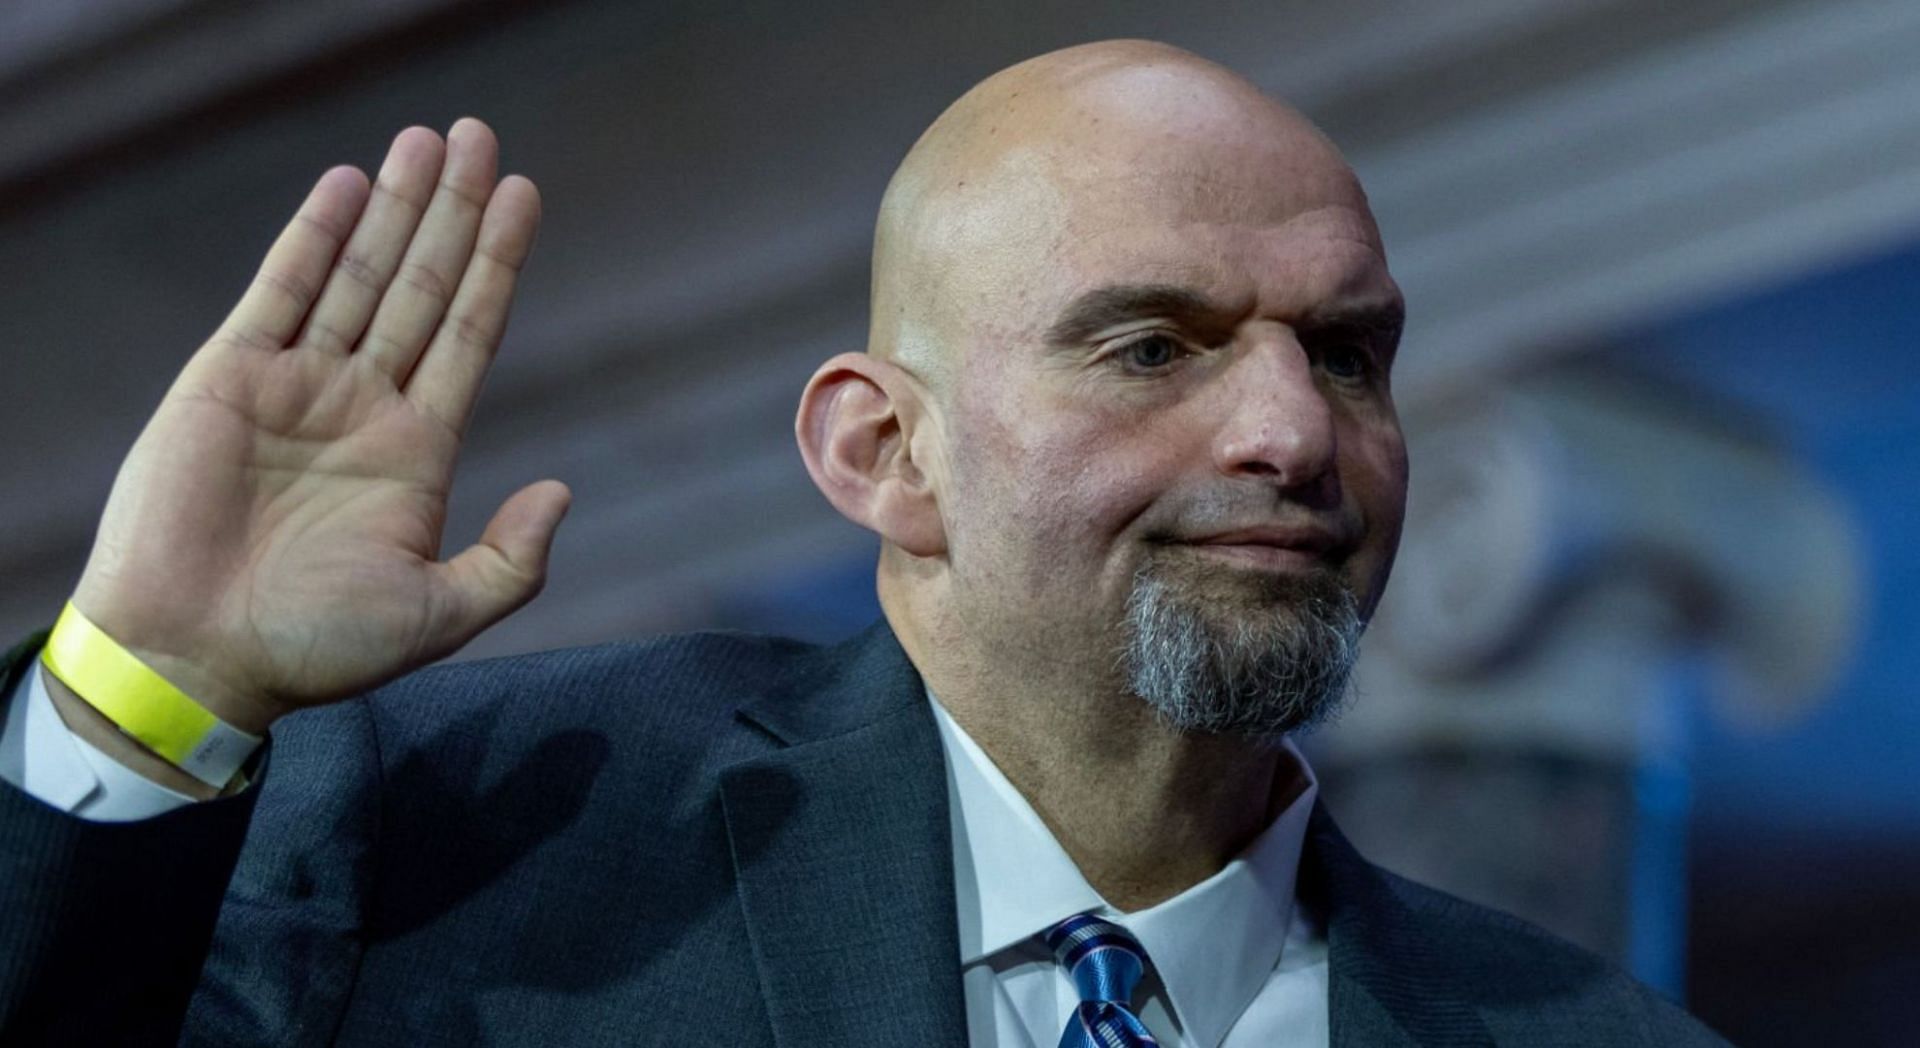 Senator John Fetterman has been admitted to hospital after being diagnosed with severe depression (Image via Getty Images)